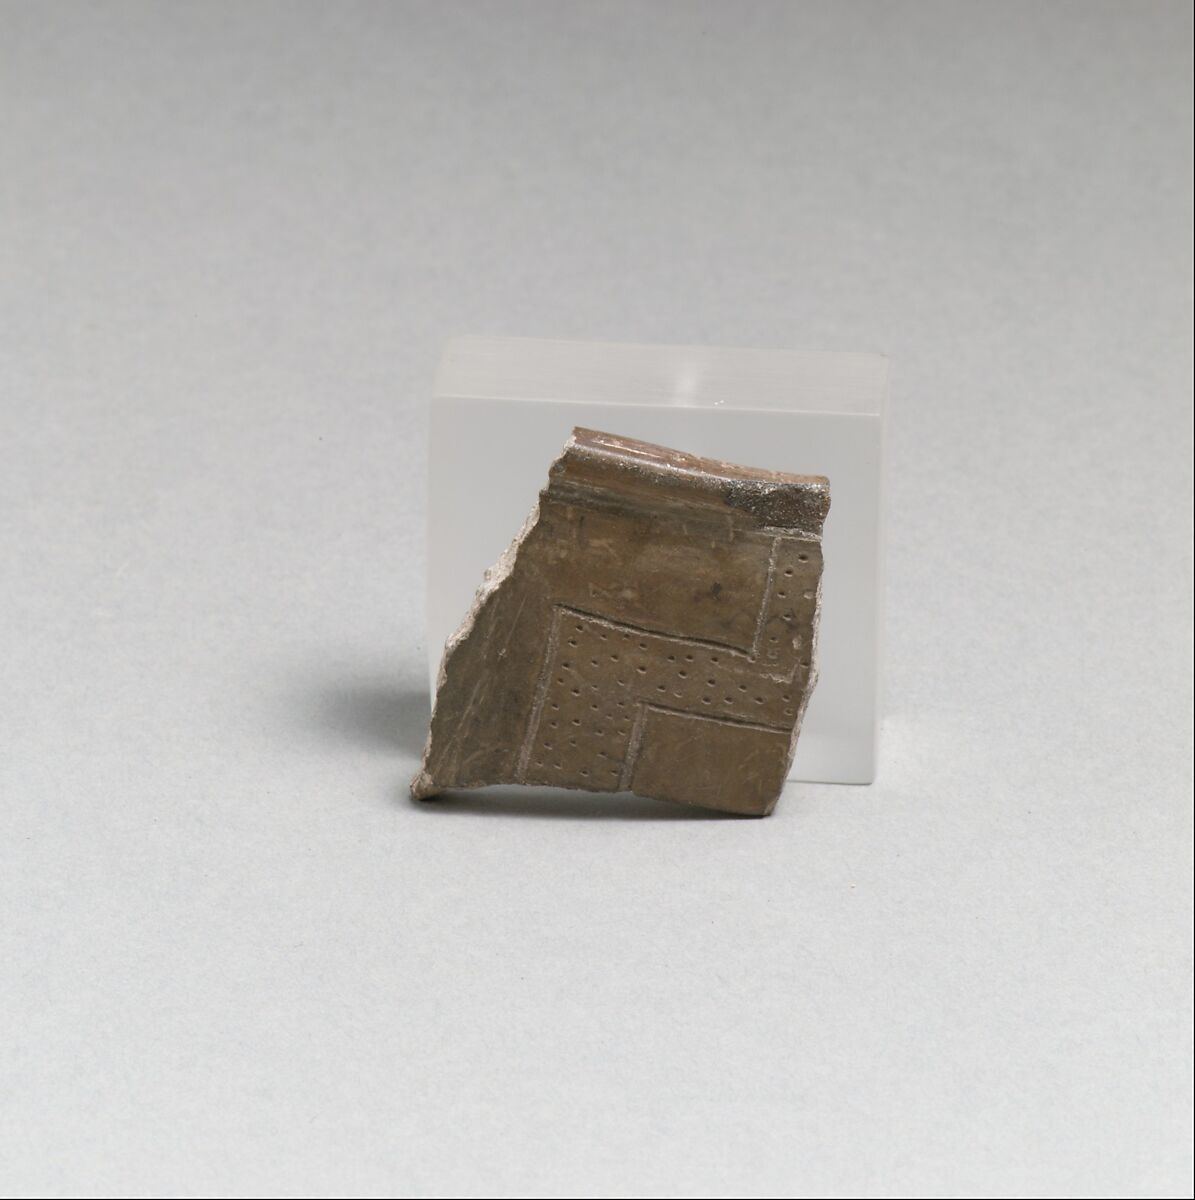 Terracotta rim fragment with incised lines and punctations, Terracotta, Cretan 